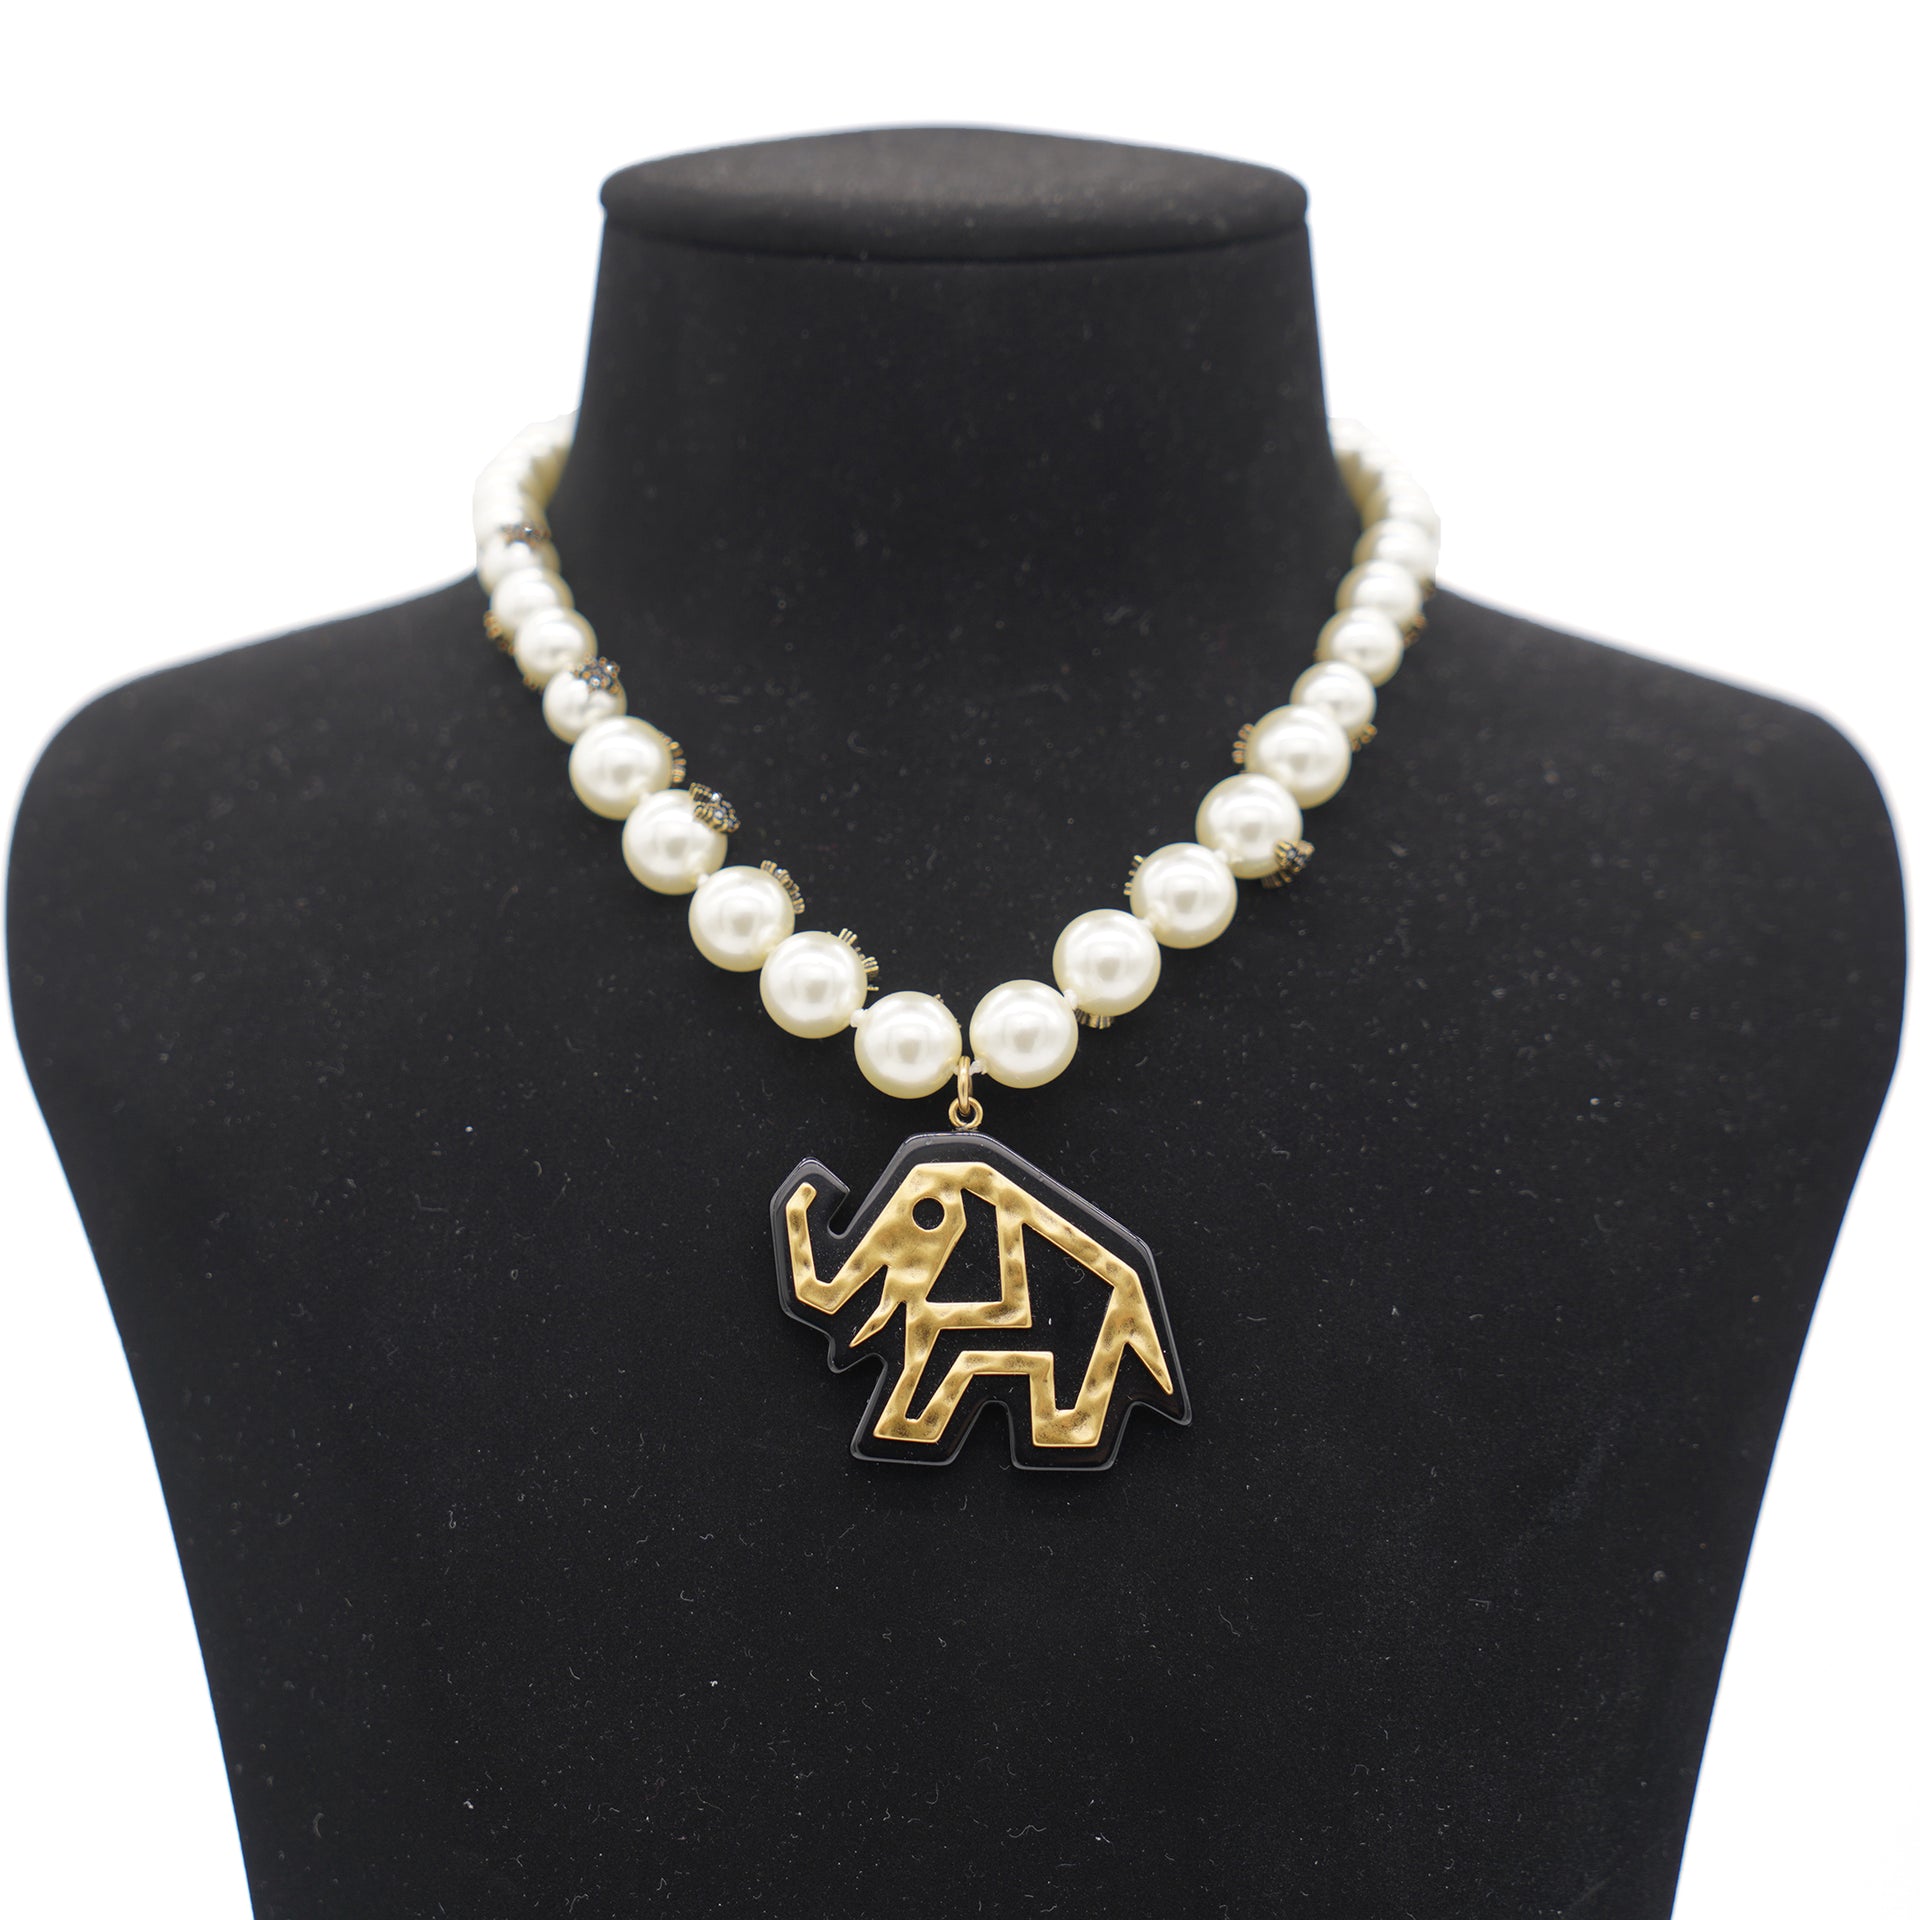 Faux Pearl Necklace with Elephant Pendant